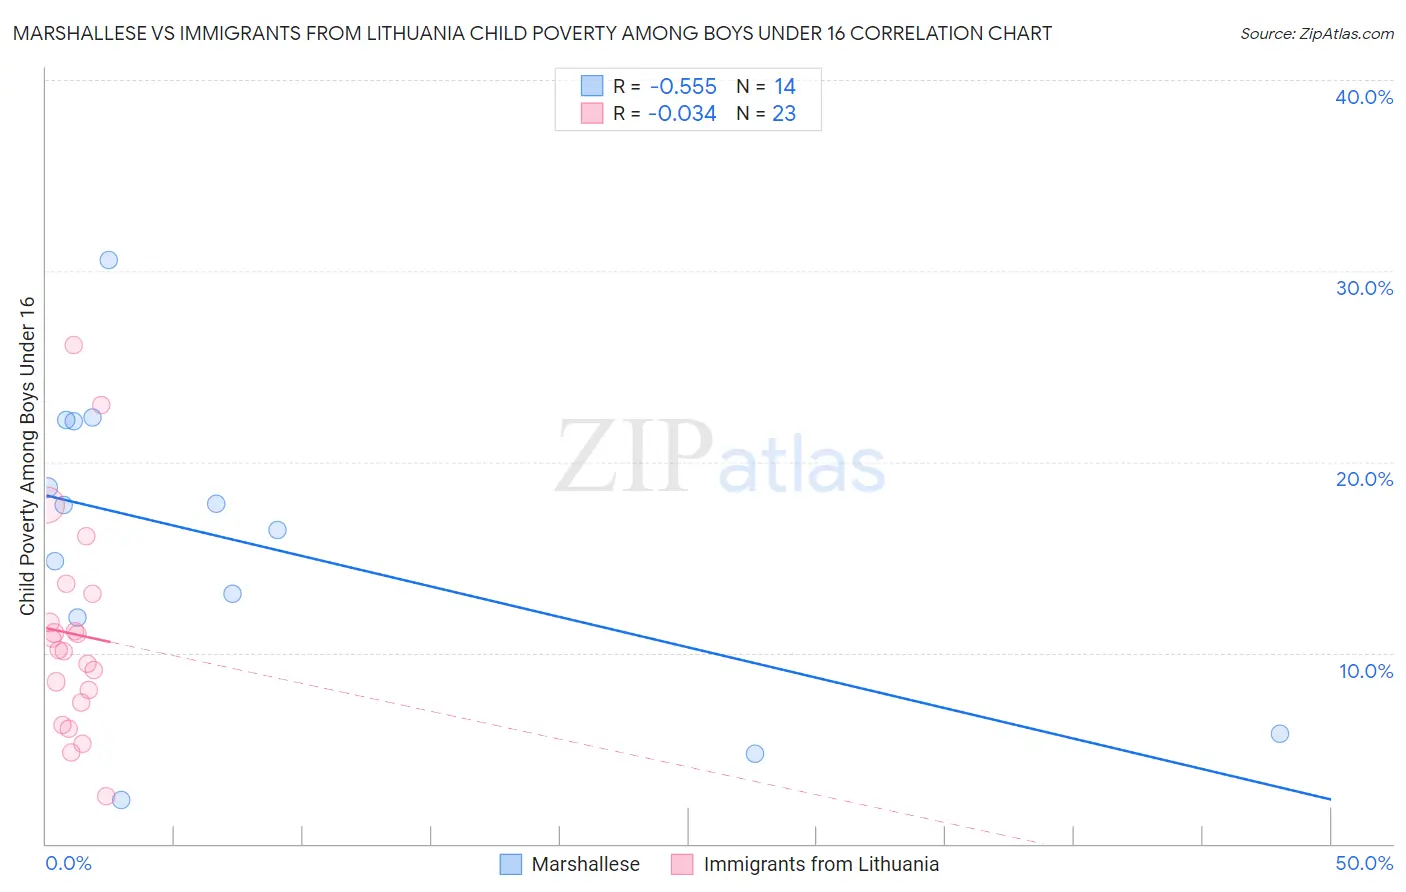 Marshallese vs Immigrants from Lithuania Child Poverty Among Boys Under 16